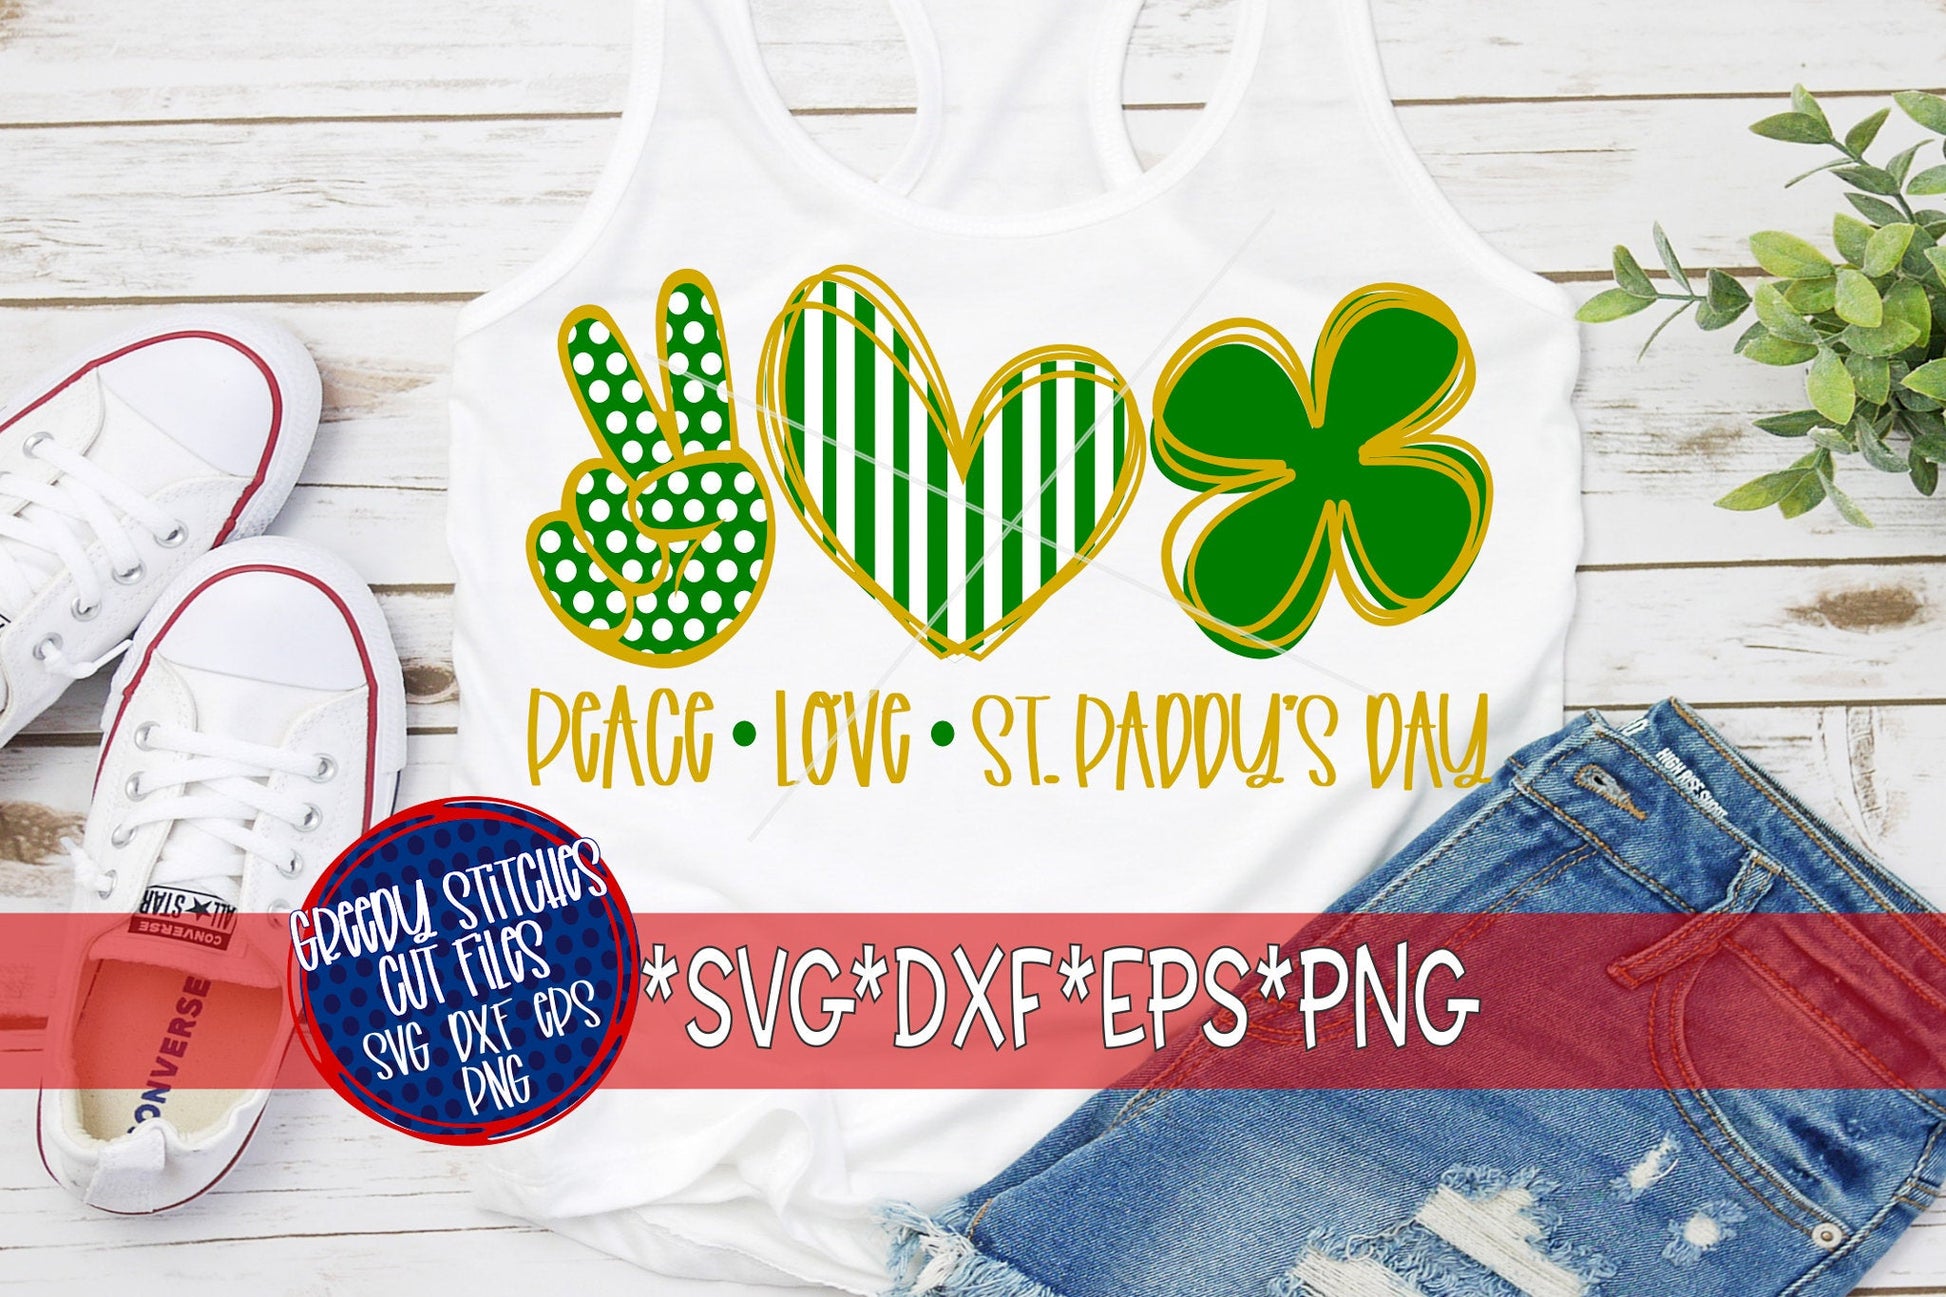 St Patricks Day SvG | Peace Love St Paddys Day svg dxf eps png. St Patricks Day SVG | St Paddys SVG | Clover SvG | Instant Download Cut File